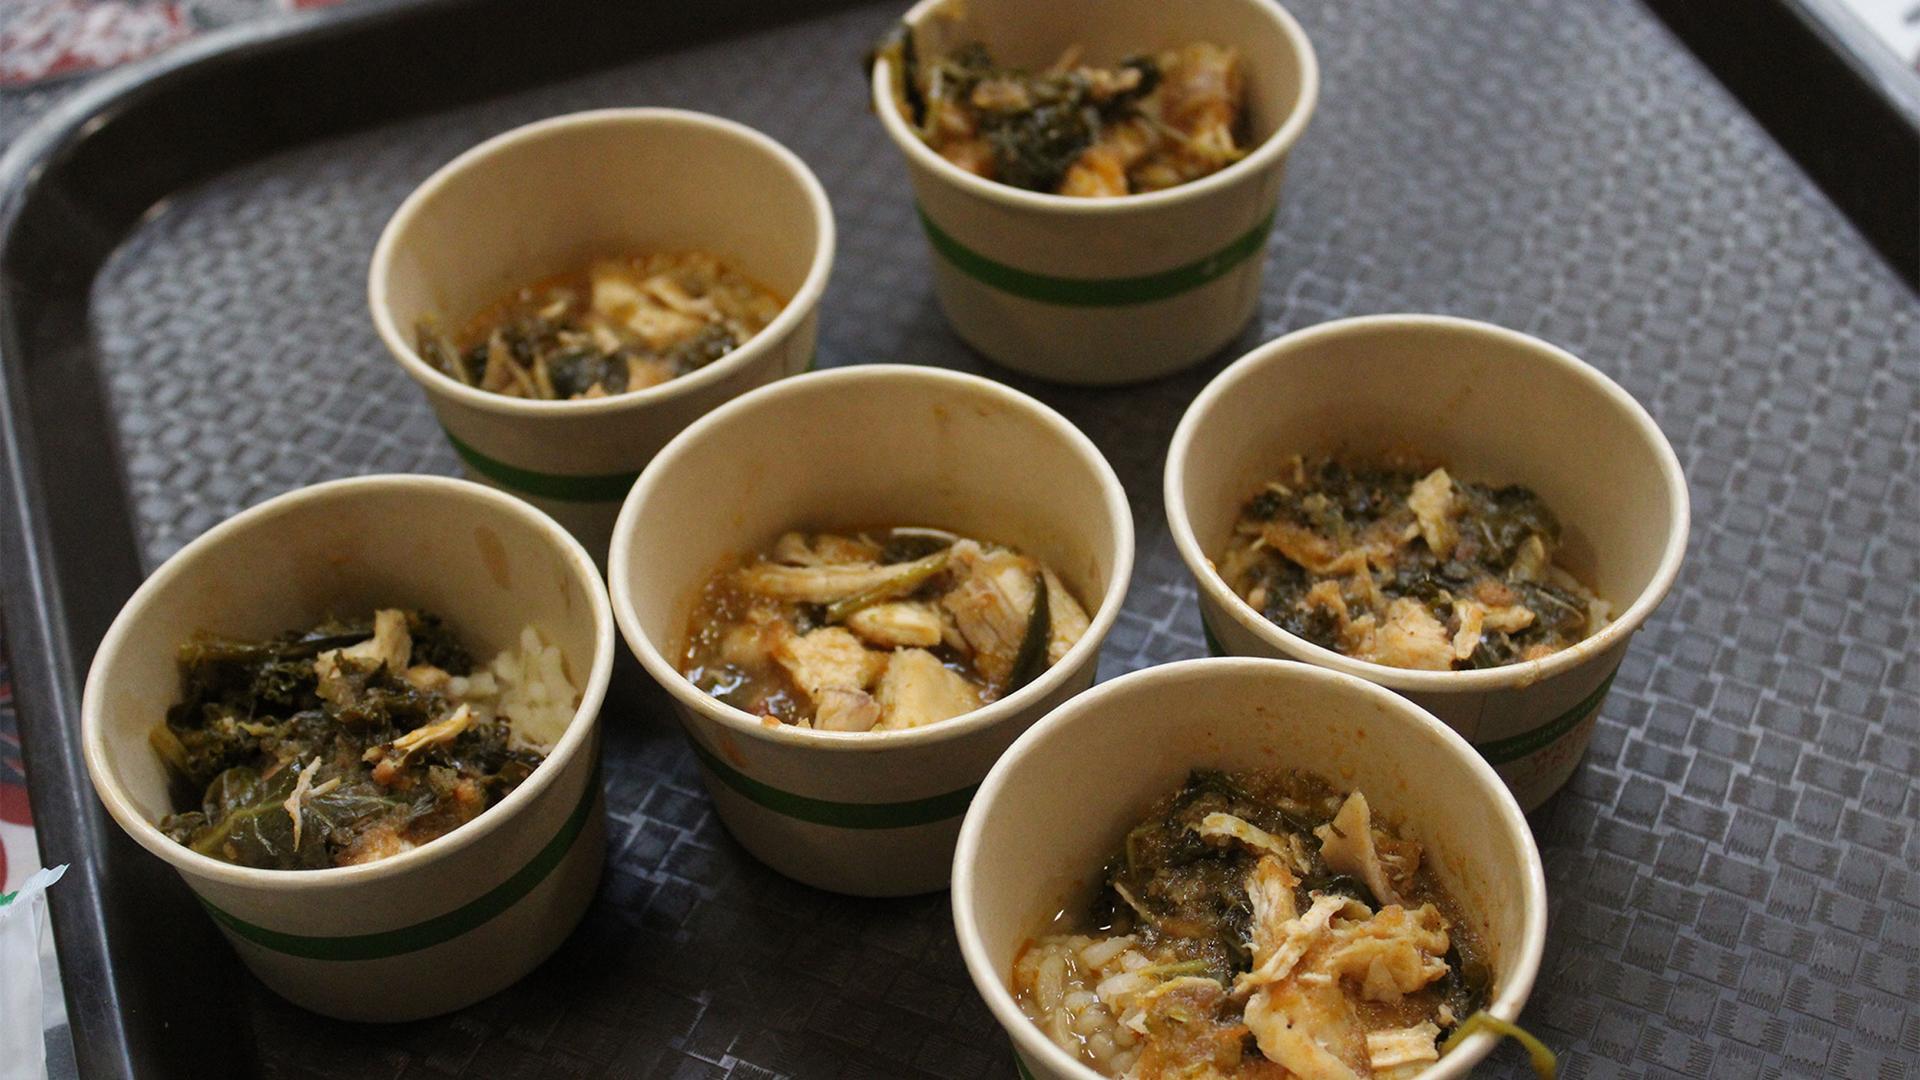 Sample portions of chicken and kale stew over rice